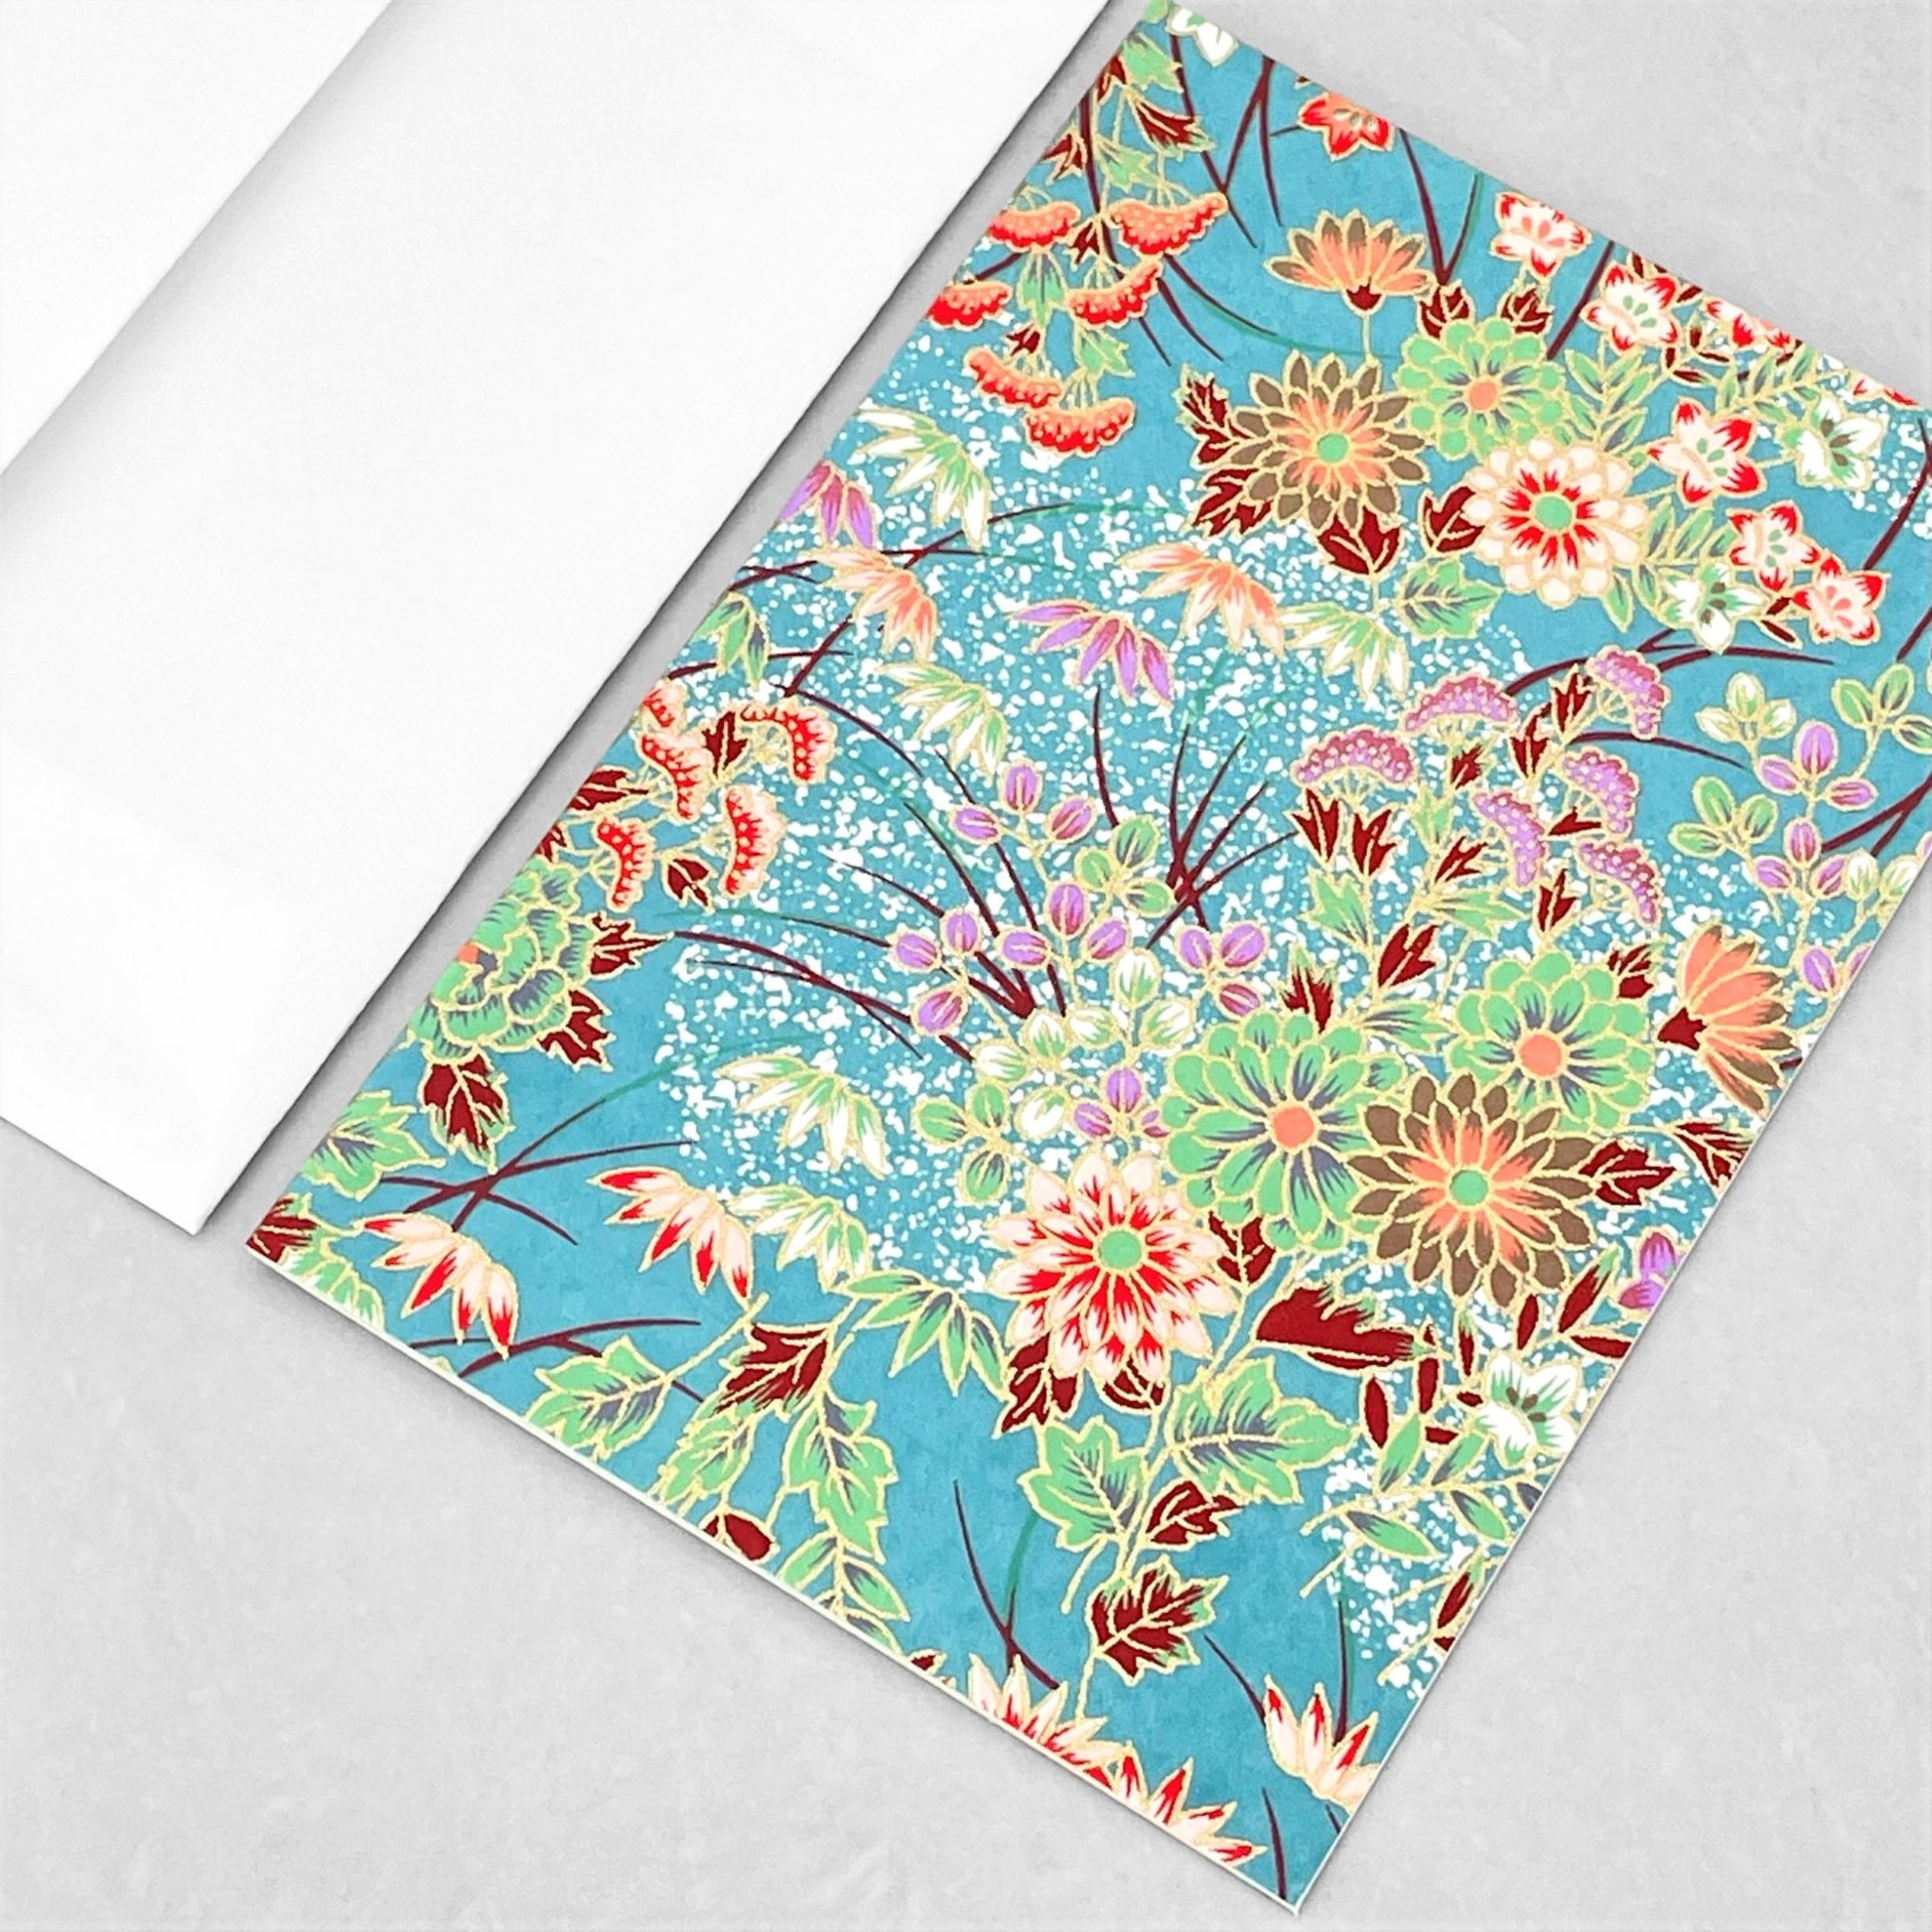 japanese silk-screen printed greetings card with a multi-colour bouquet of flowers pattern on a teal backdrop by Esmie